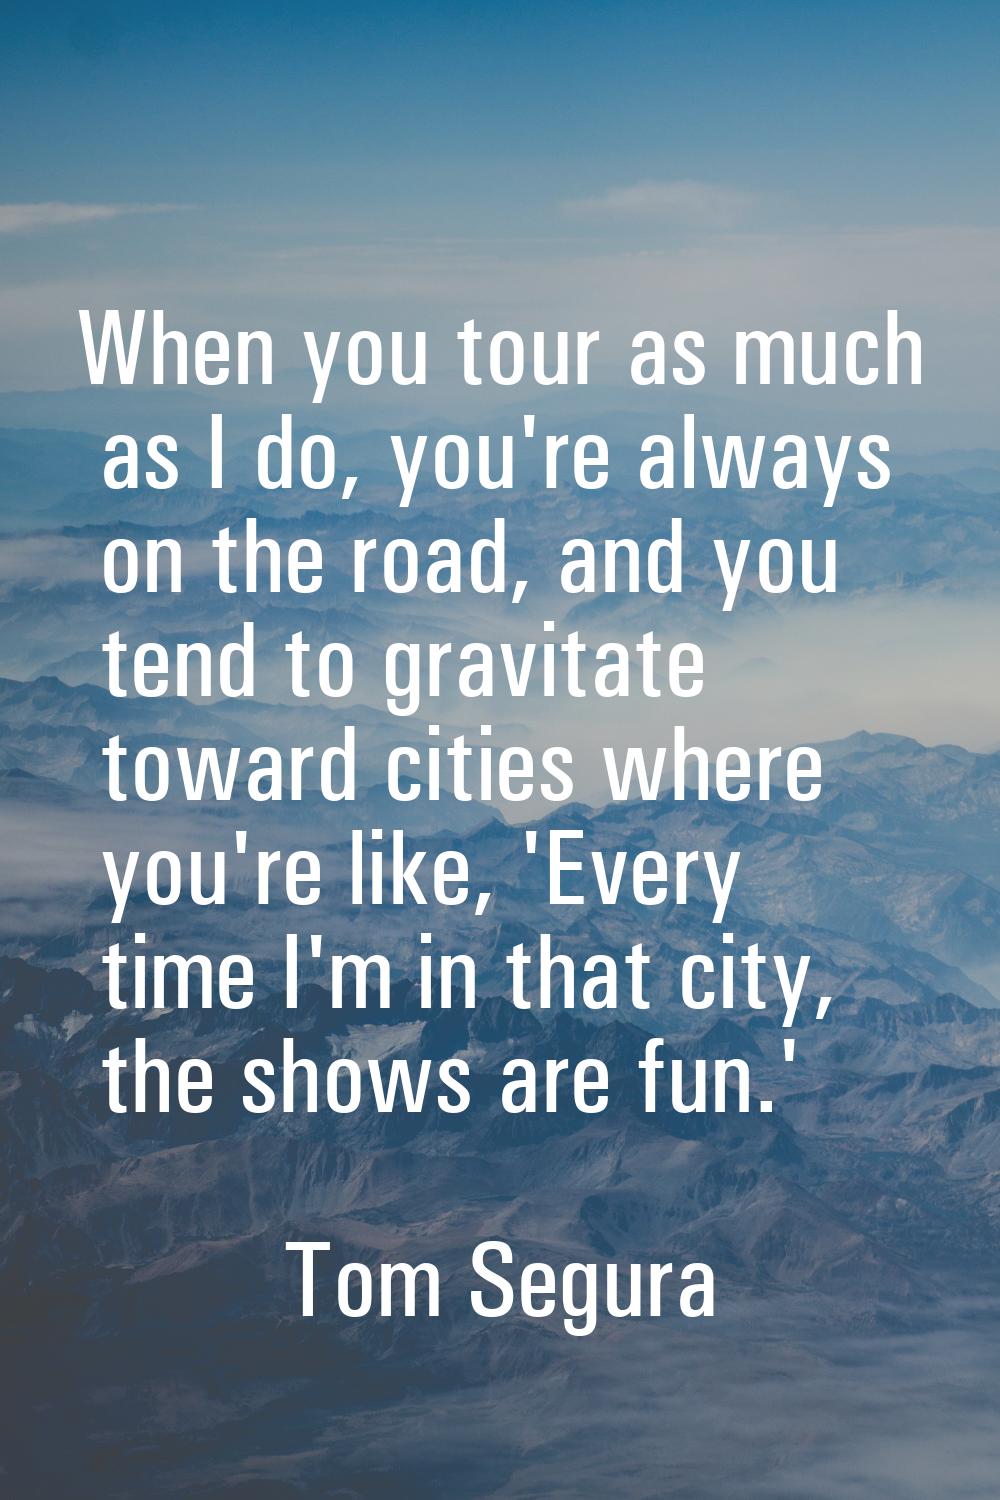 When you tour as much as I do, you're always on the road, and you tend to gravitate toward cities w